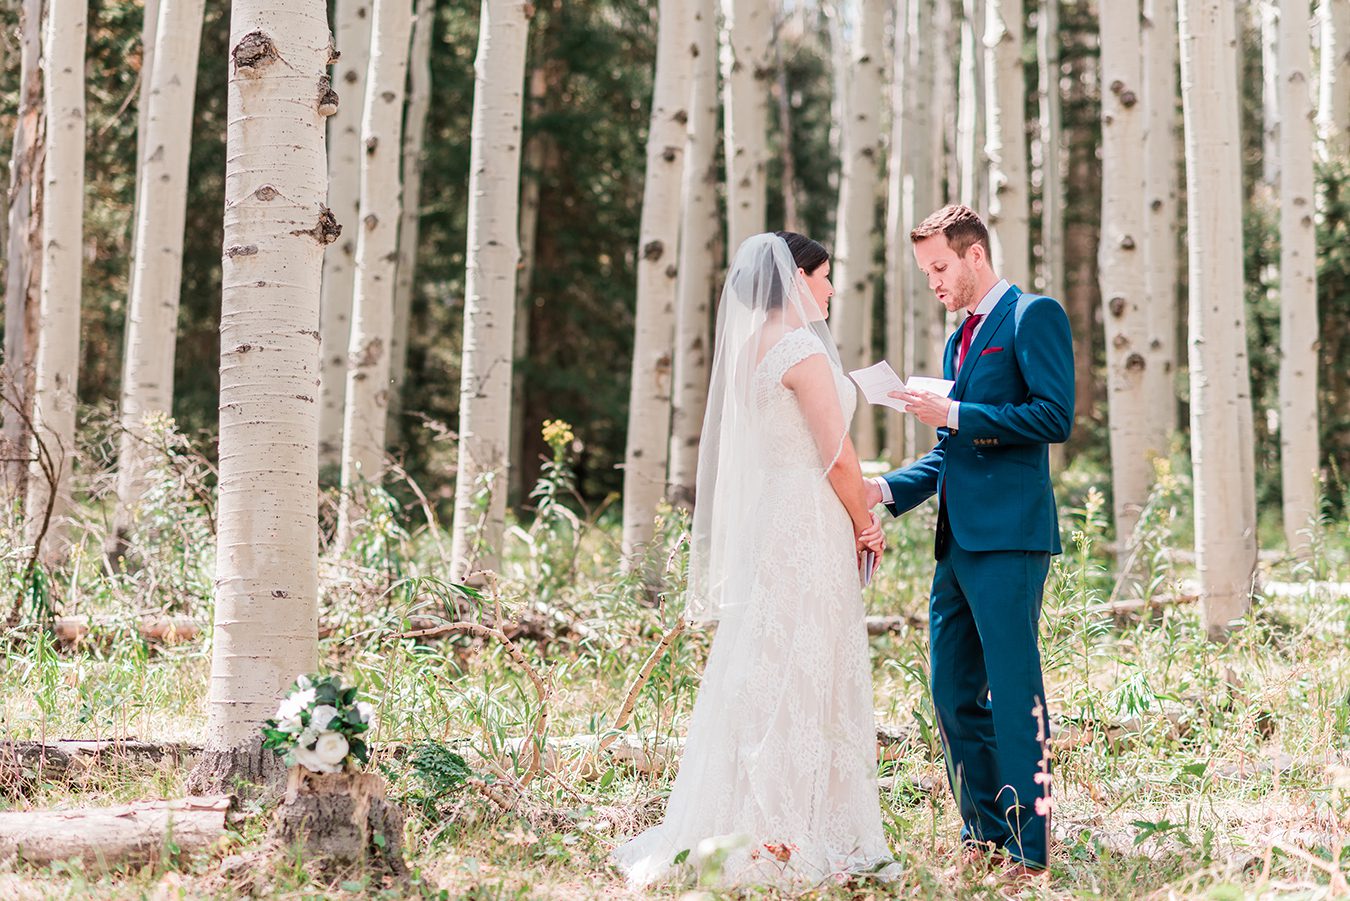 Bride and Groom exchange vows in an aspen grove during their Elopement in Glenwood Springs